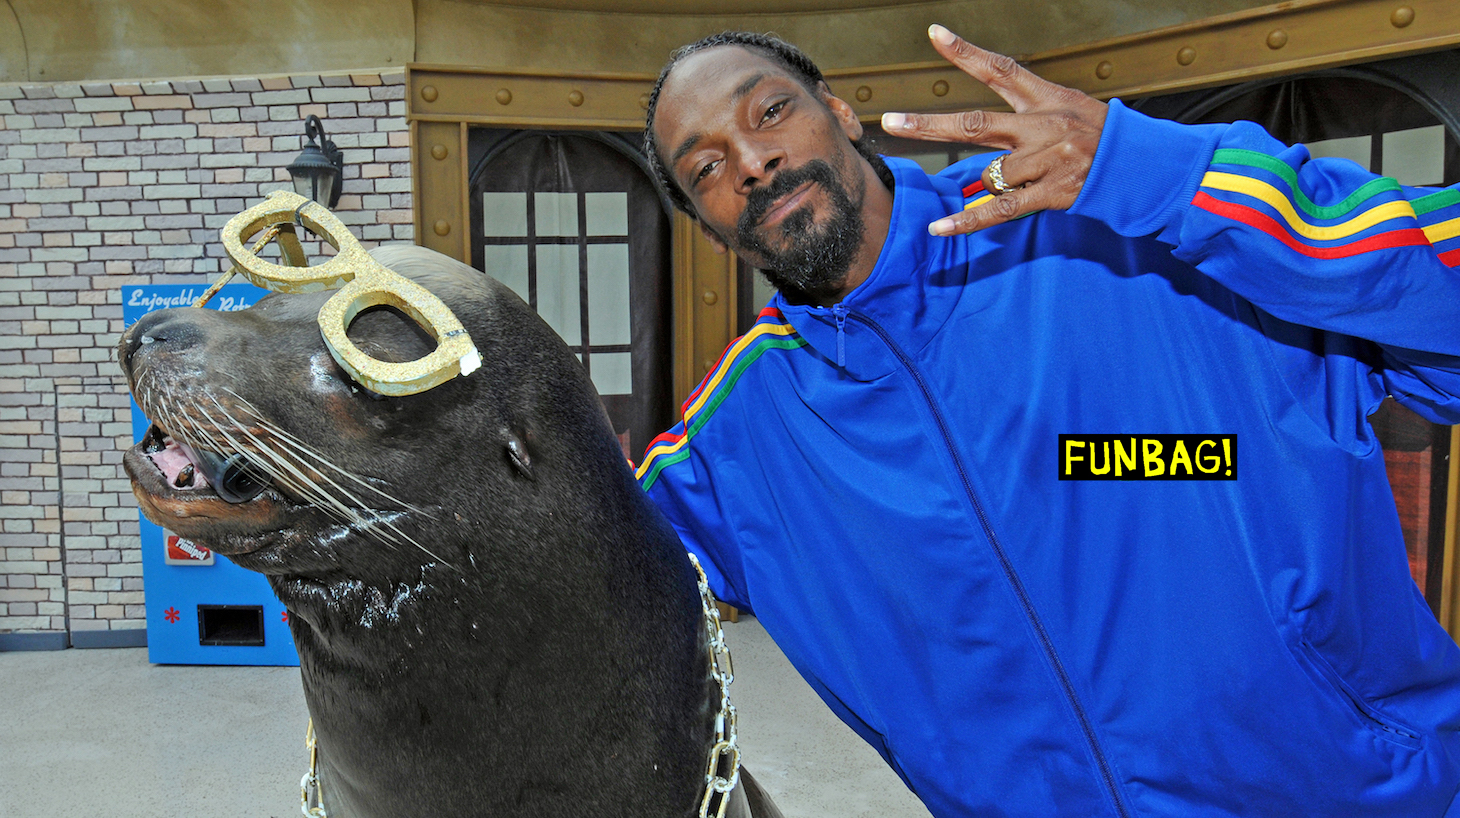 Snoop Dogg may be one of the world's most famous entertainers, but SeaWorld San Diego's Clyde the Sea Lion wanted the rapper to know that he too can "Bring the Bling." Snoop Dogg, who was recently in San Diego for a concert, spent a few hours at the marine-life park interacting with several of the SeaWorld's animals and shared some center-stage time with Clyde at Sea Lion and Otter Stadium. Clyde said he'd be happy to collaborate with Snoop Dogg on one of his future hip-hop songs! Photo: Bob Couey - SeaWorld San Diego Contact: Bob Couey Visual Services Manager SeaWorld San Diego